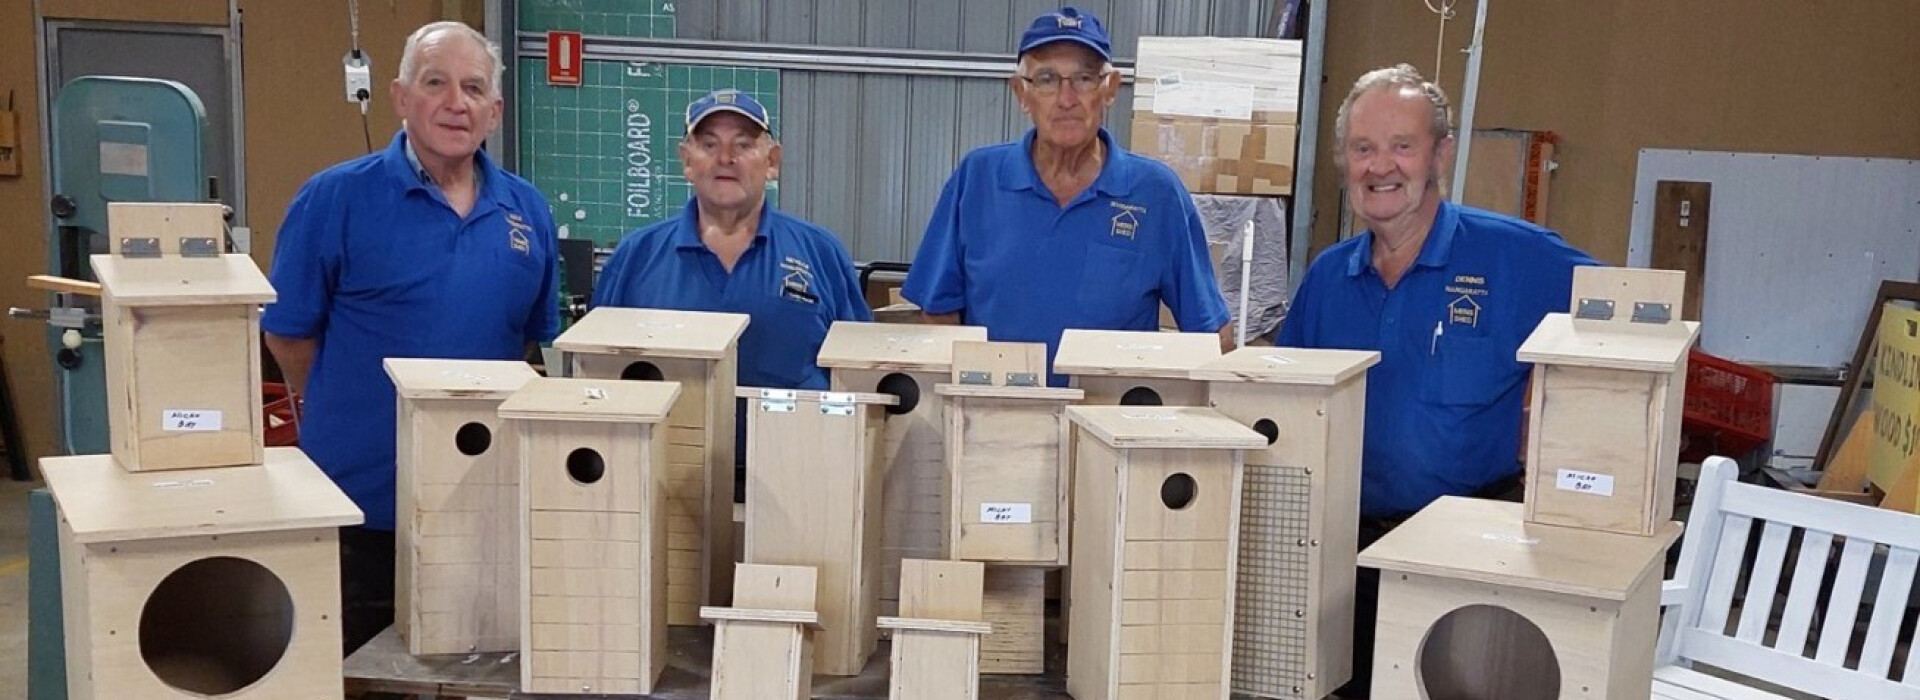 Building nesting boxes with the Men's Shed